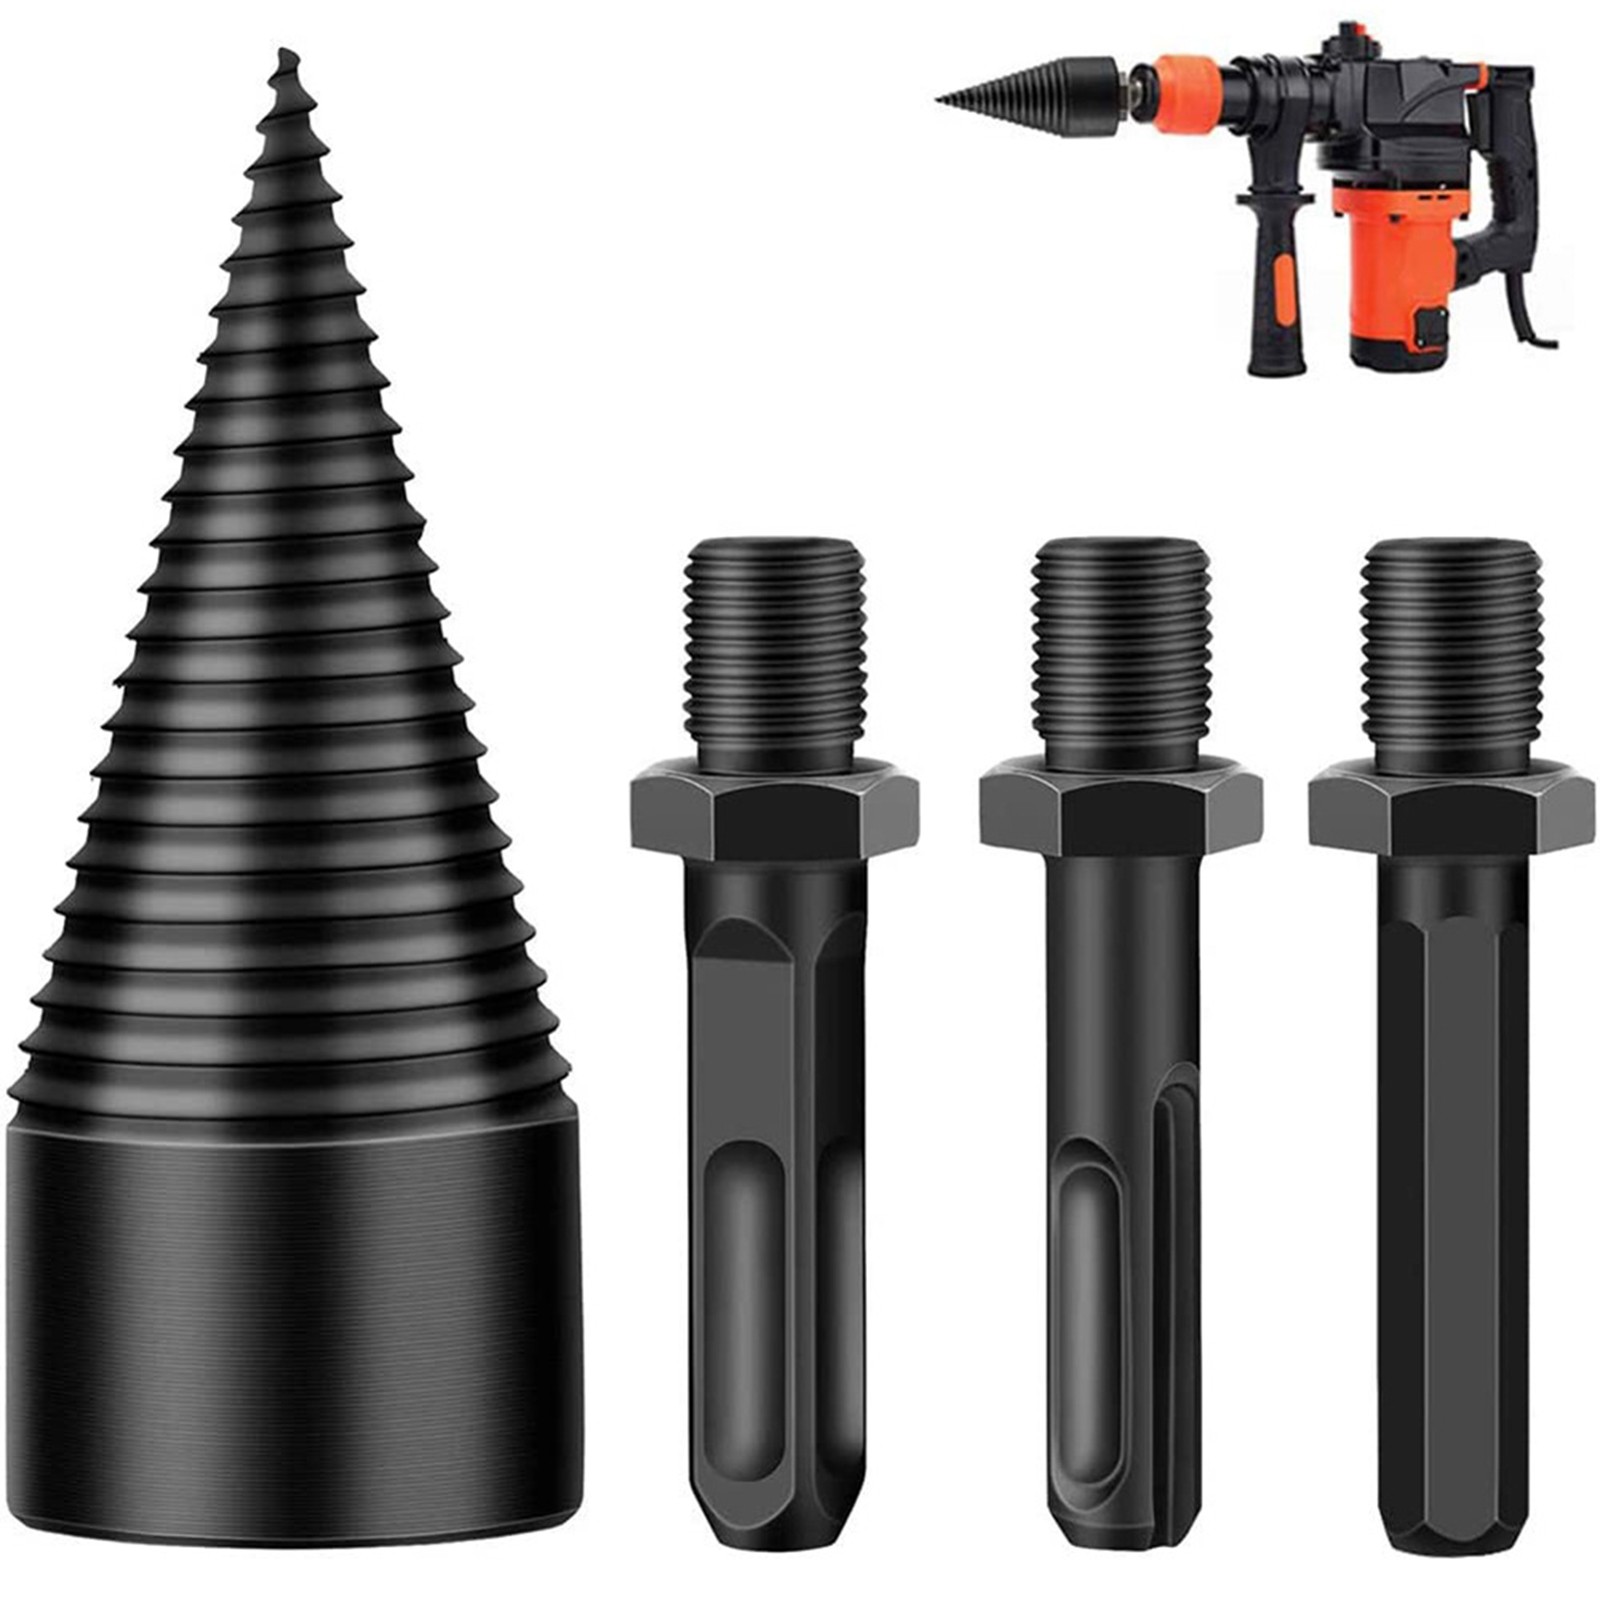 Fridja 3pcs Removable Firewood Log Splitter Drill Bit, Wood Splitter Drill Bits,Heavy Duty Drill Screw Cone Driver for Hand Drill Stick-hex+Square+Round (32mm) - image 1 of 7